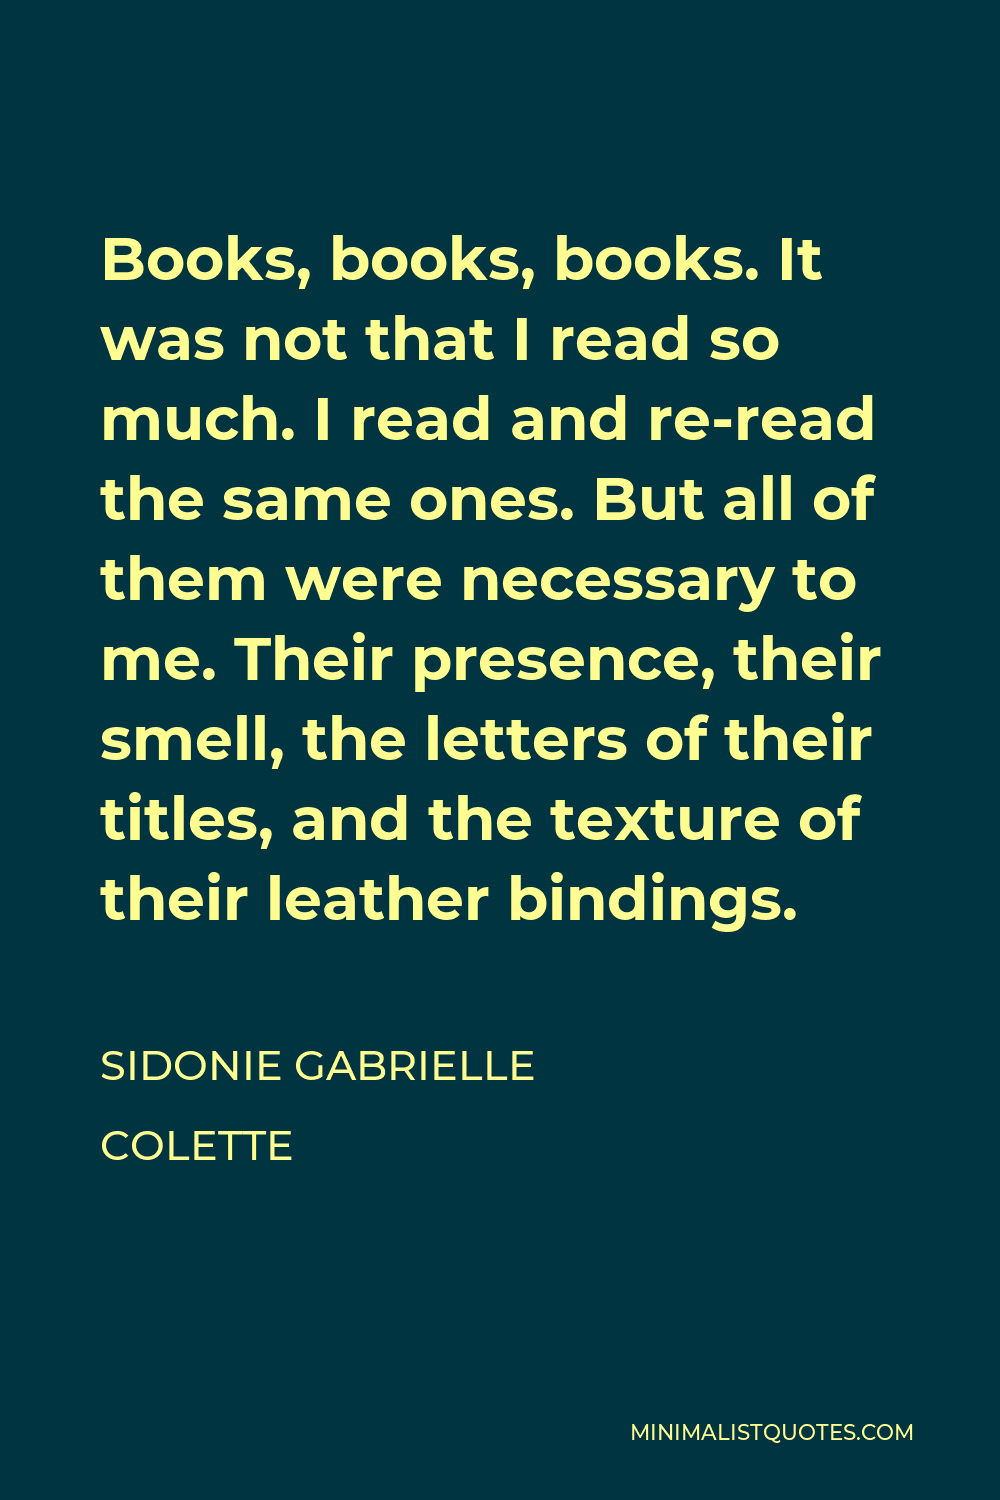 Sidonie Gabrielle Colette Quote - Books, books, books. It was not that I read so much. I read and re-read the same ones. But all of them were necessary to me. Their presence, their smell, the letters of their titles, and the texture of their leather bindings.